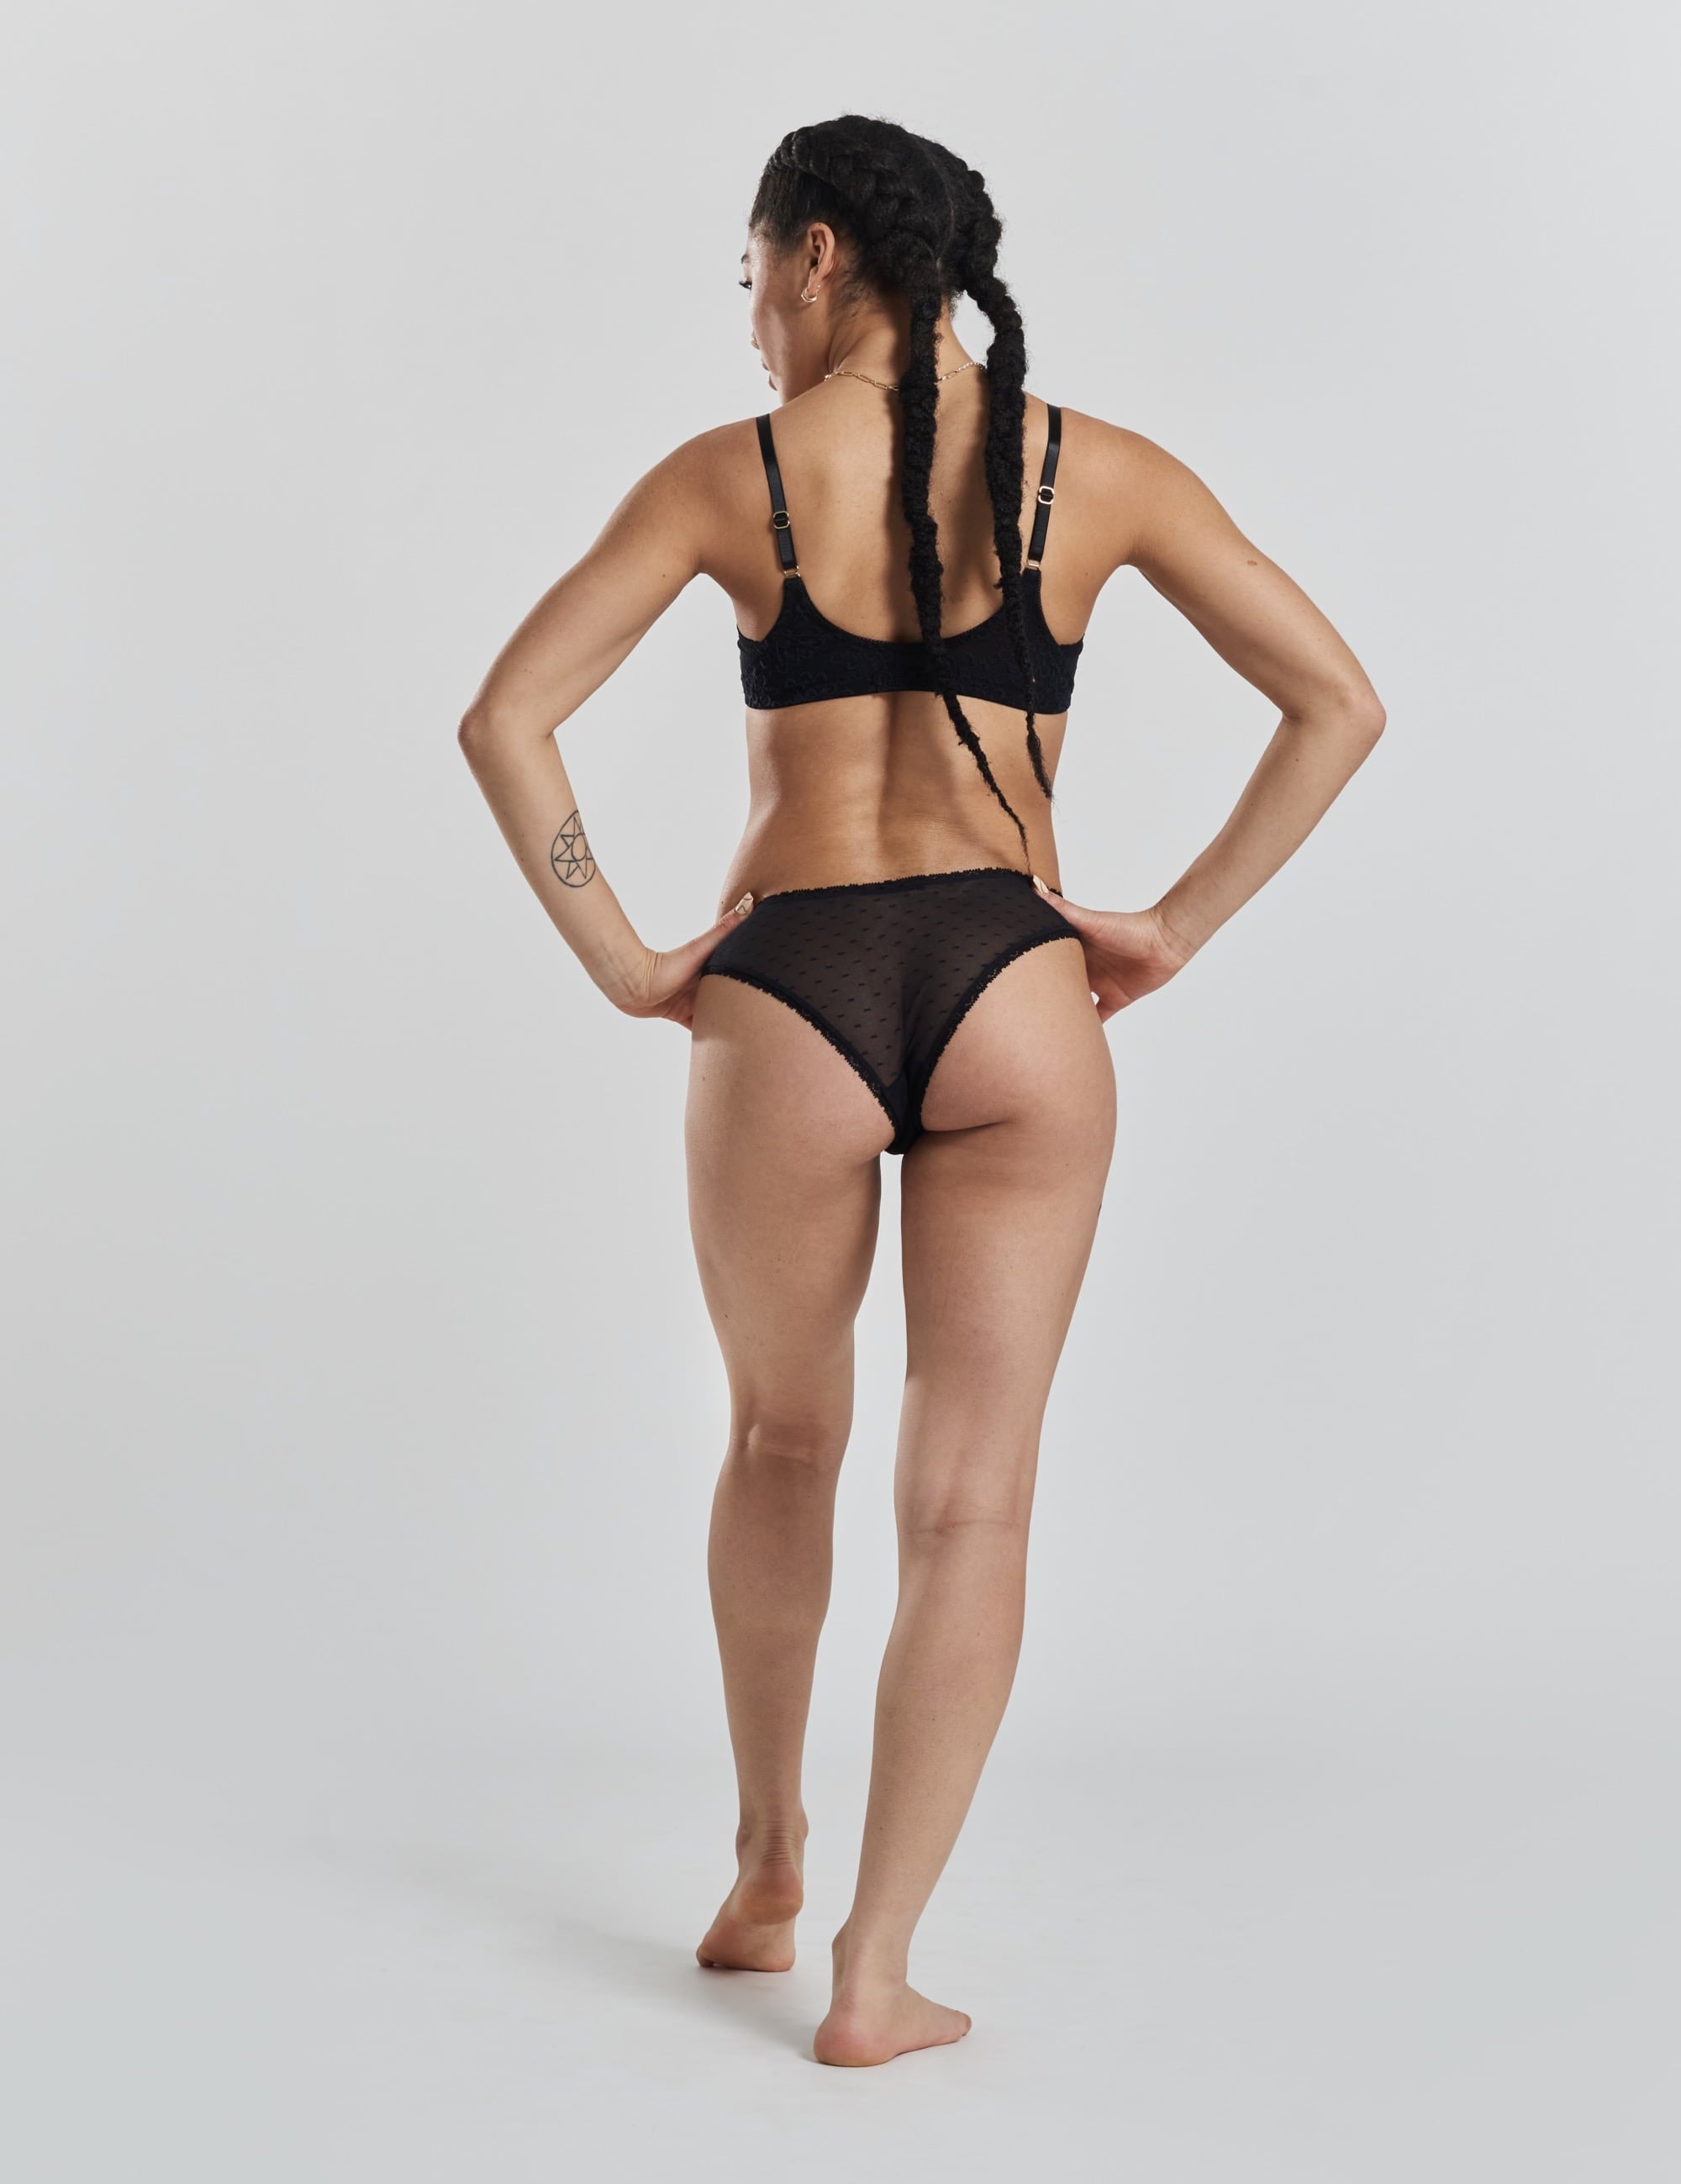 Peachaus Underwear Review: Tried & Tested Ethical Lingerie